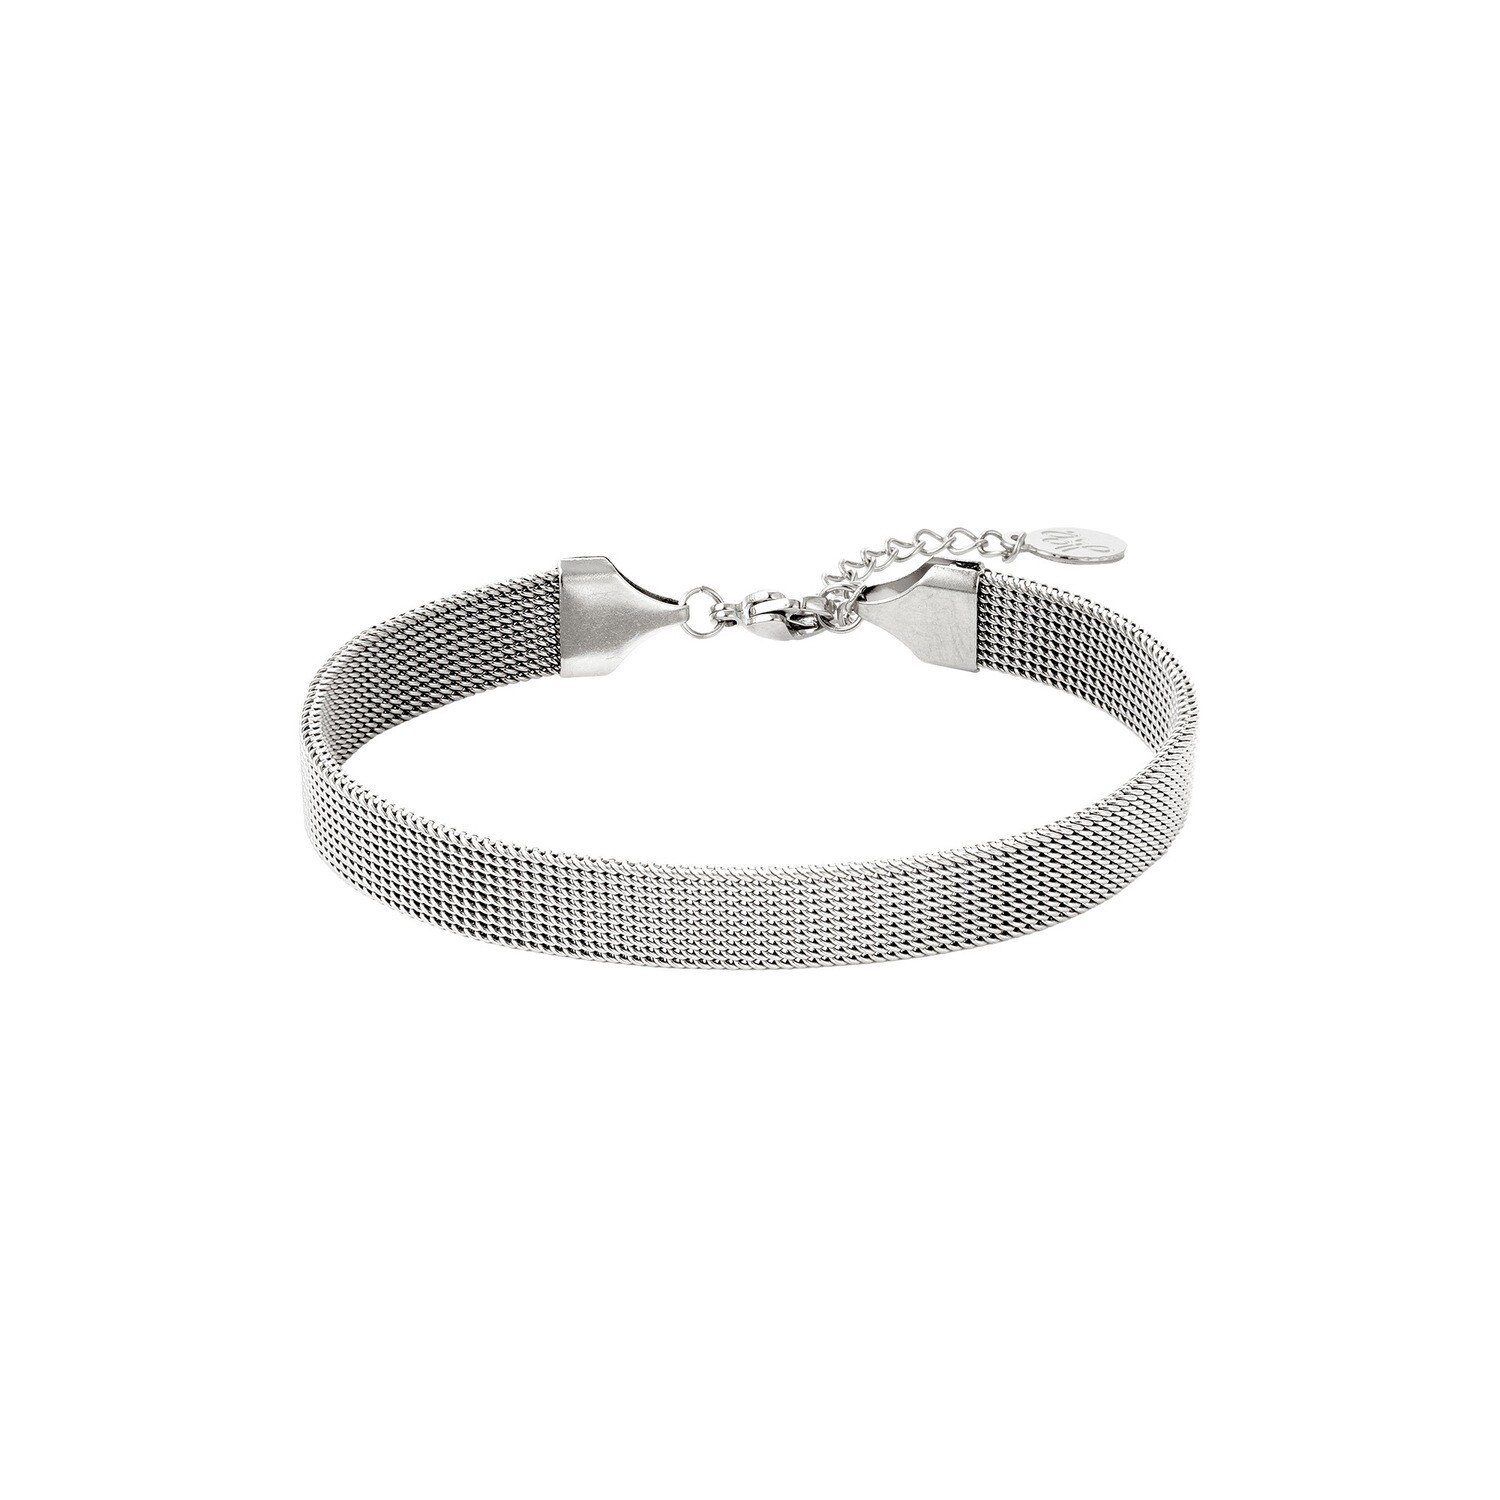 Brede armband zilver Stainless steel